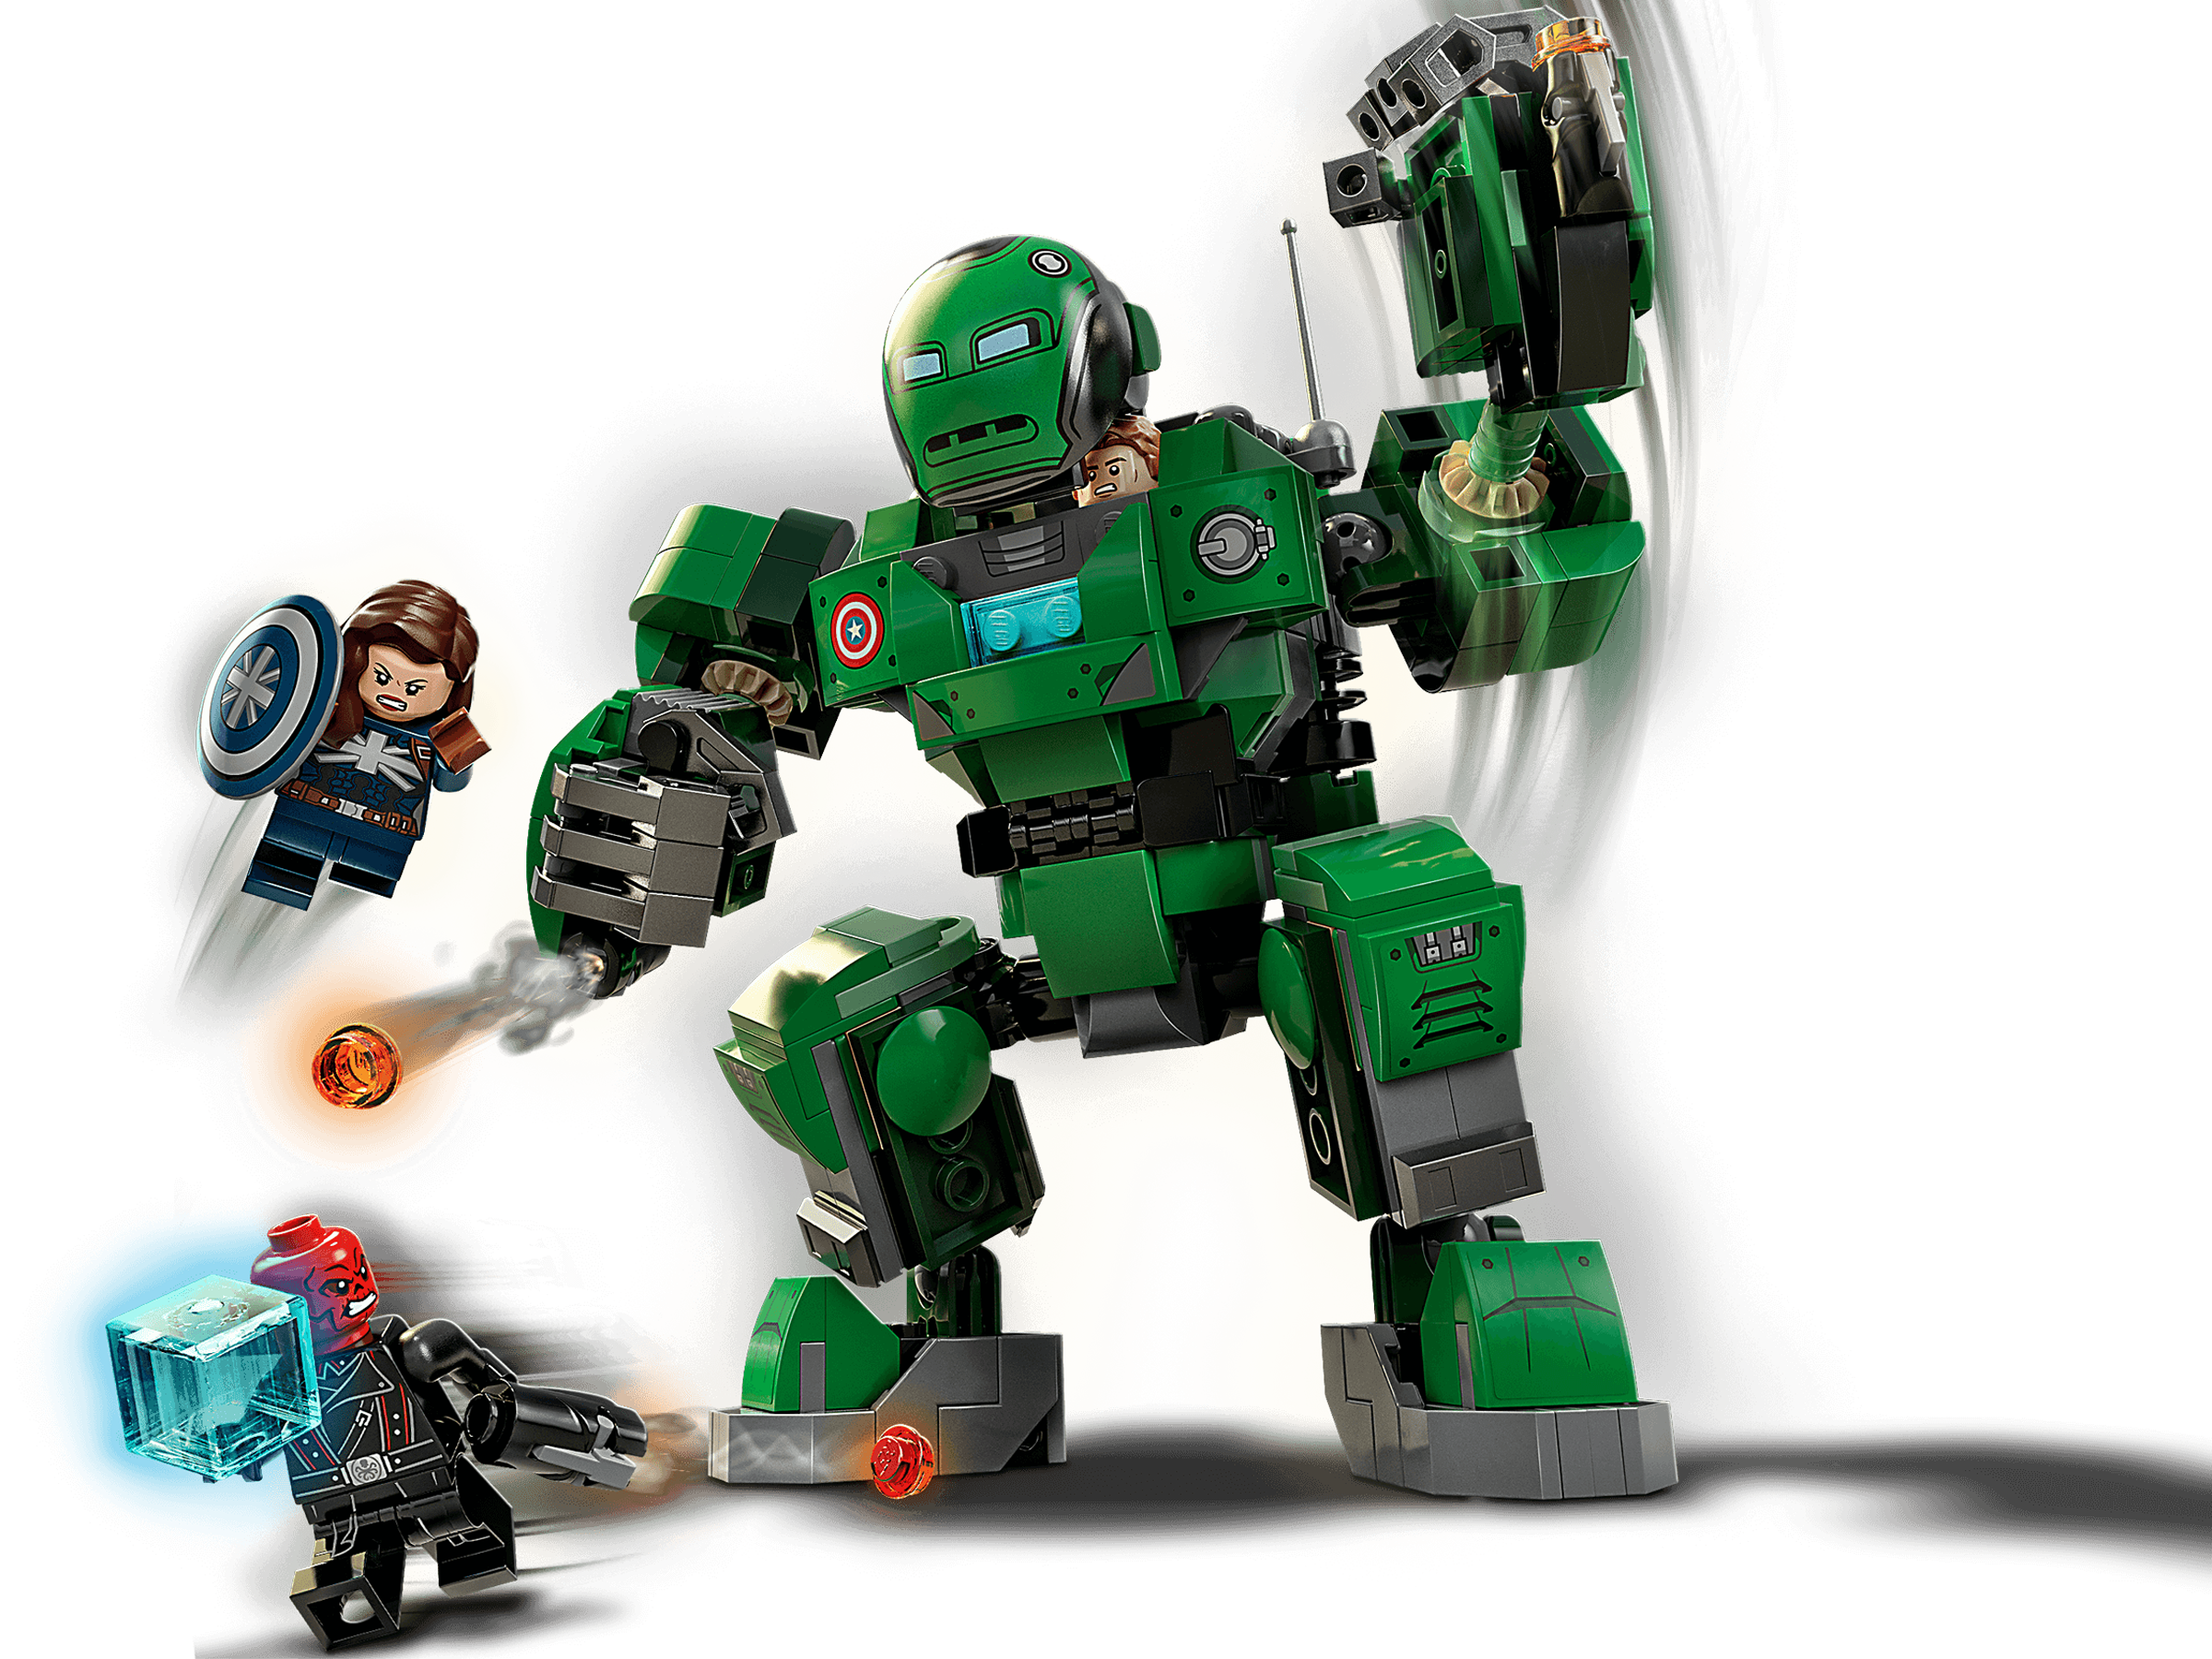 LEGO Marvel Super Heroes Captain Carter & The Hydra Stomper 76201